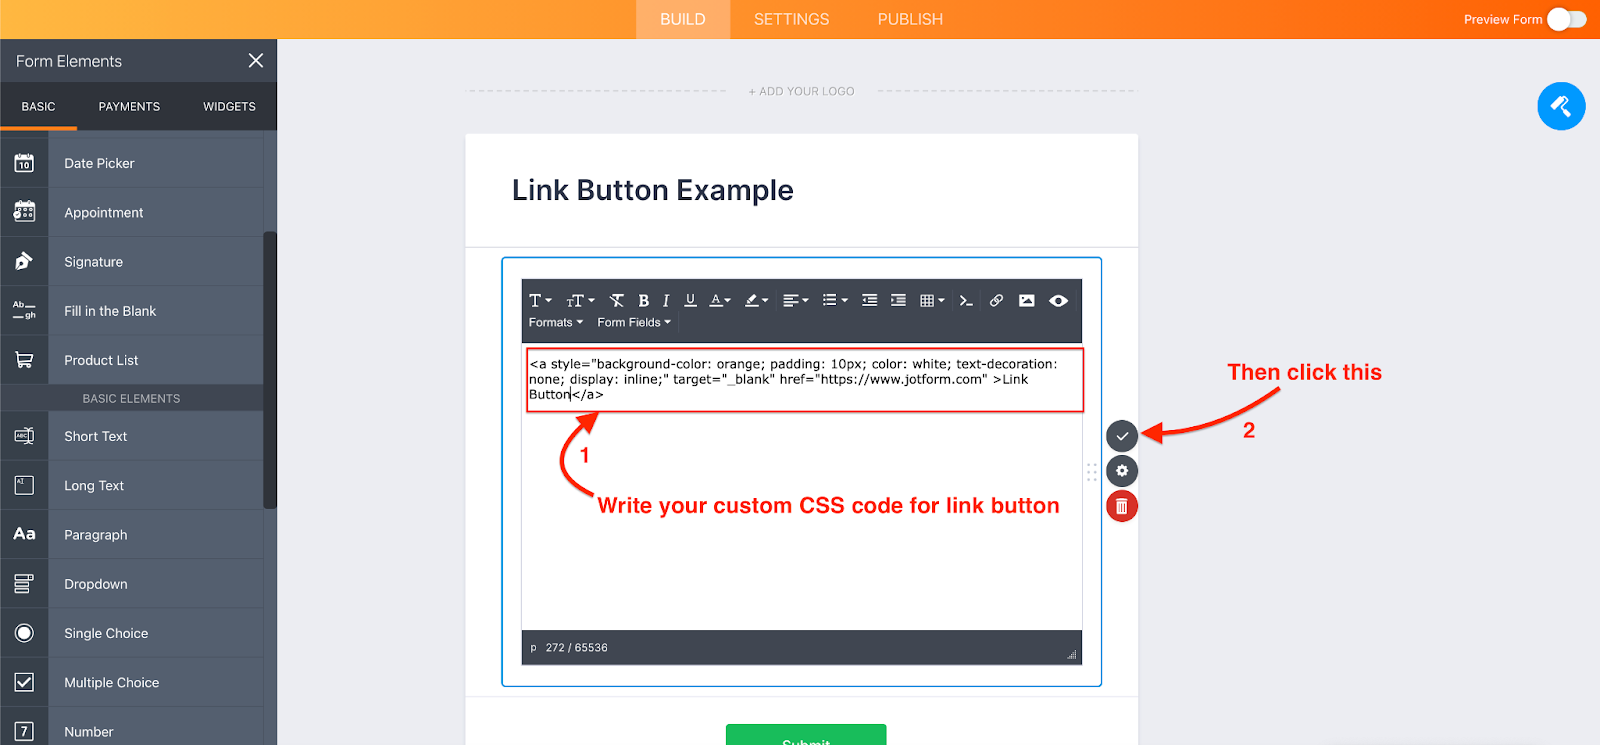 How can I create a link button?